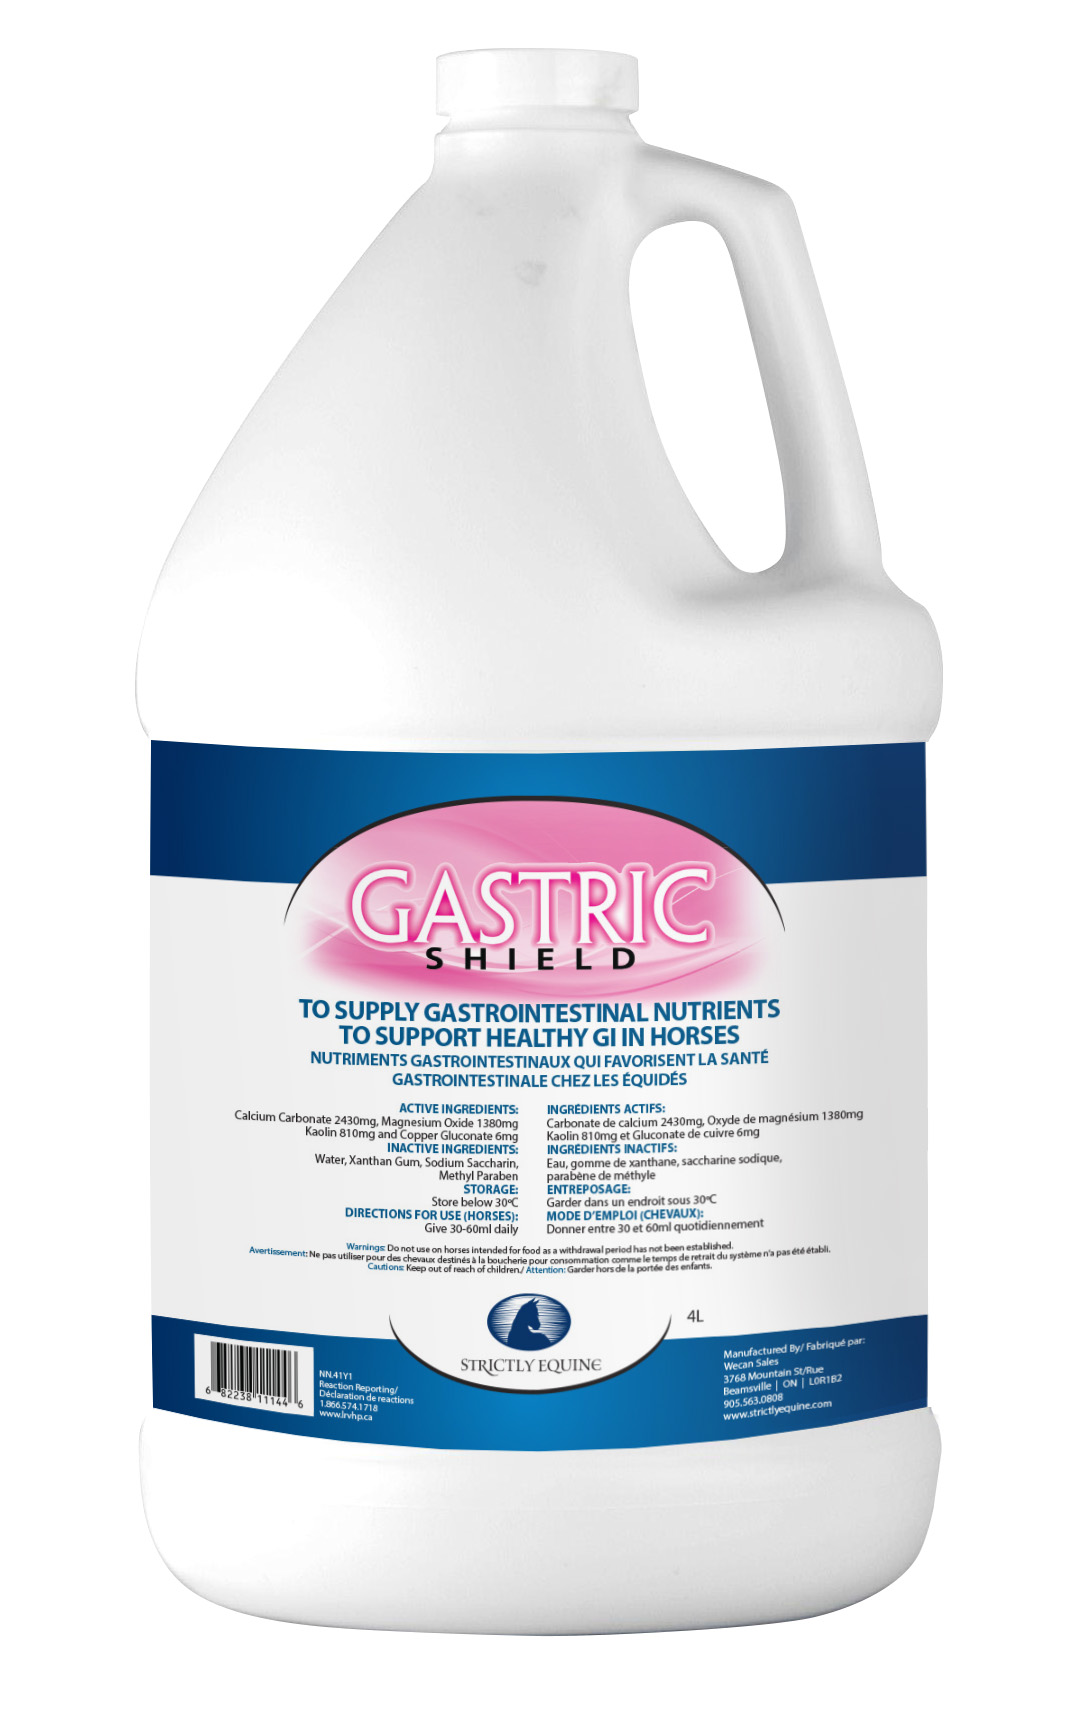 STRICTLY EQUINE GASTRIC SHIELD 4 L